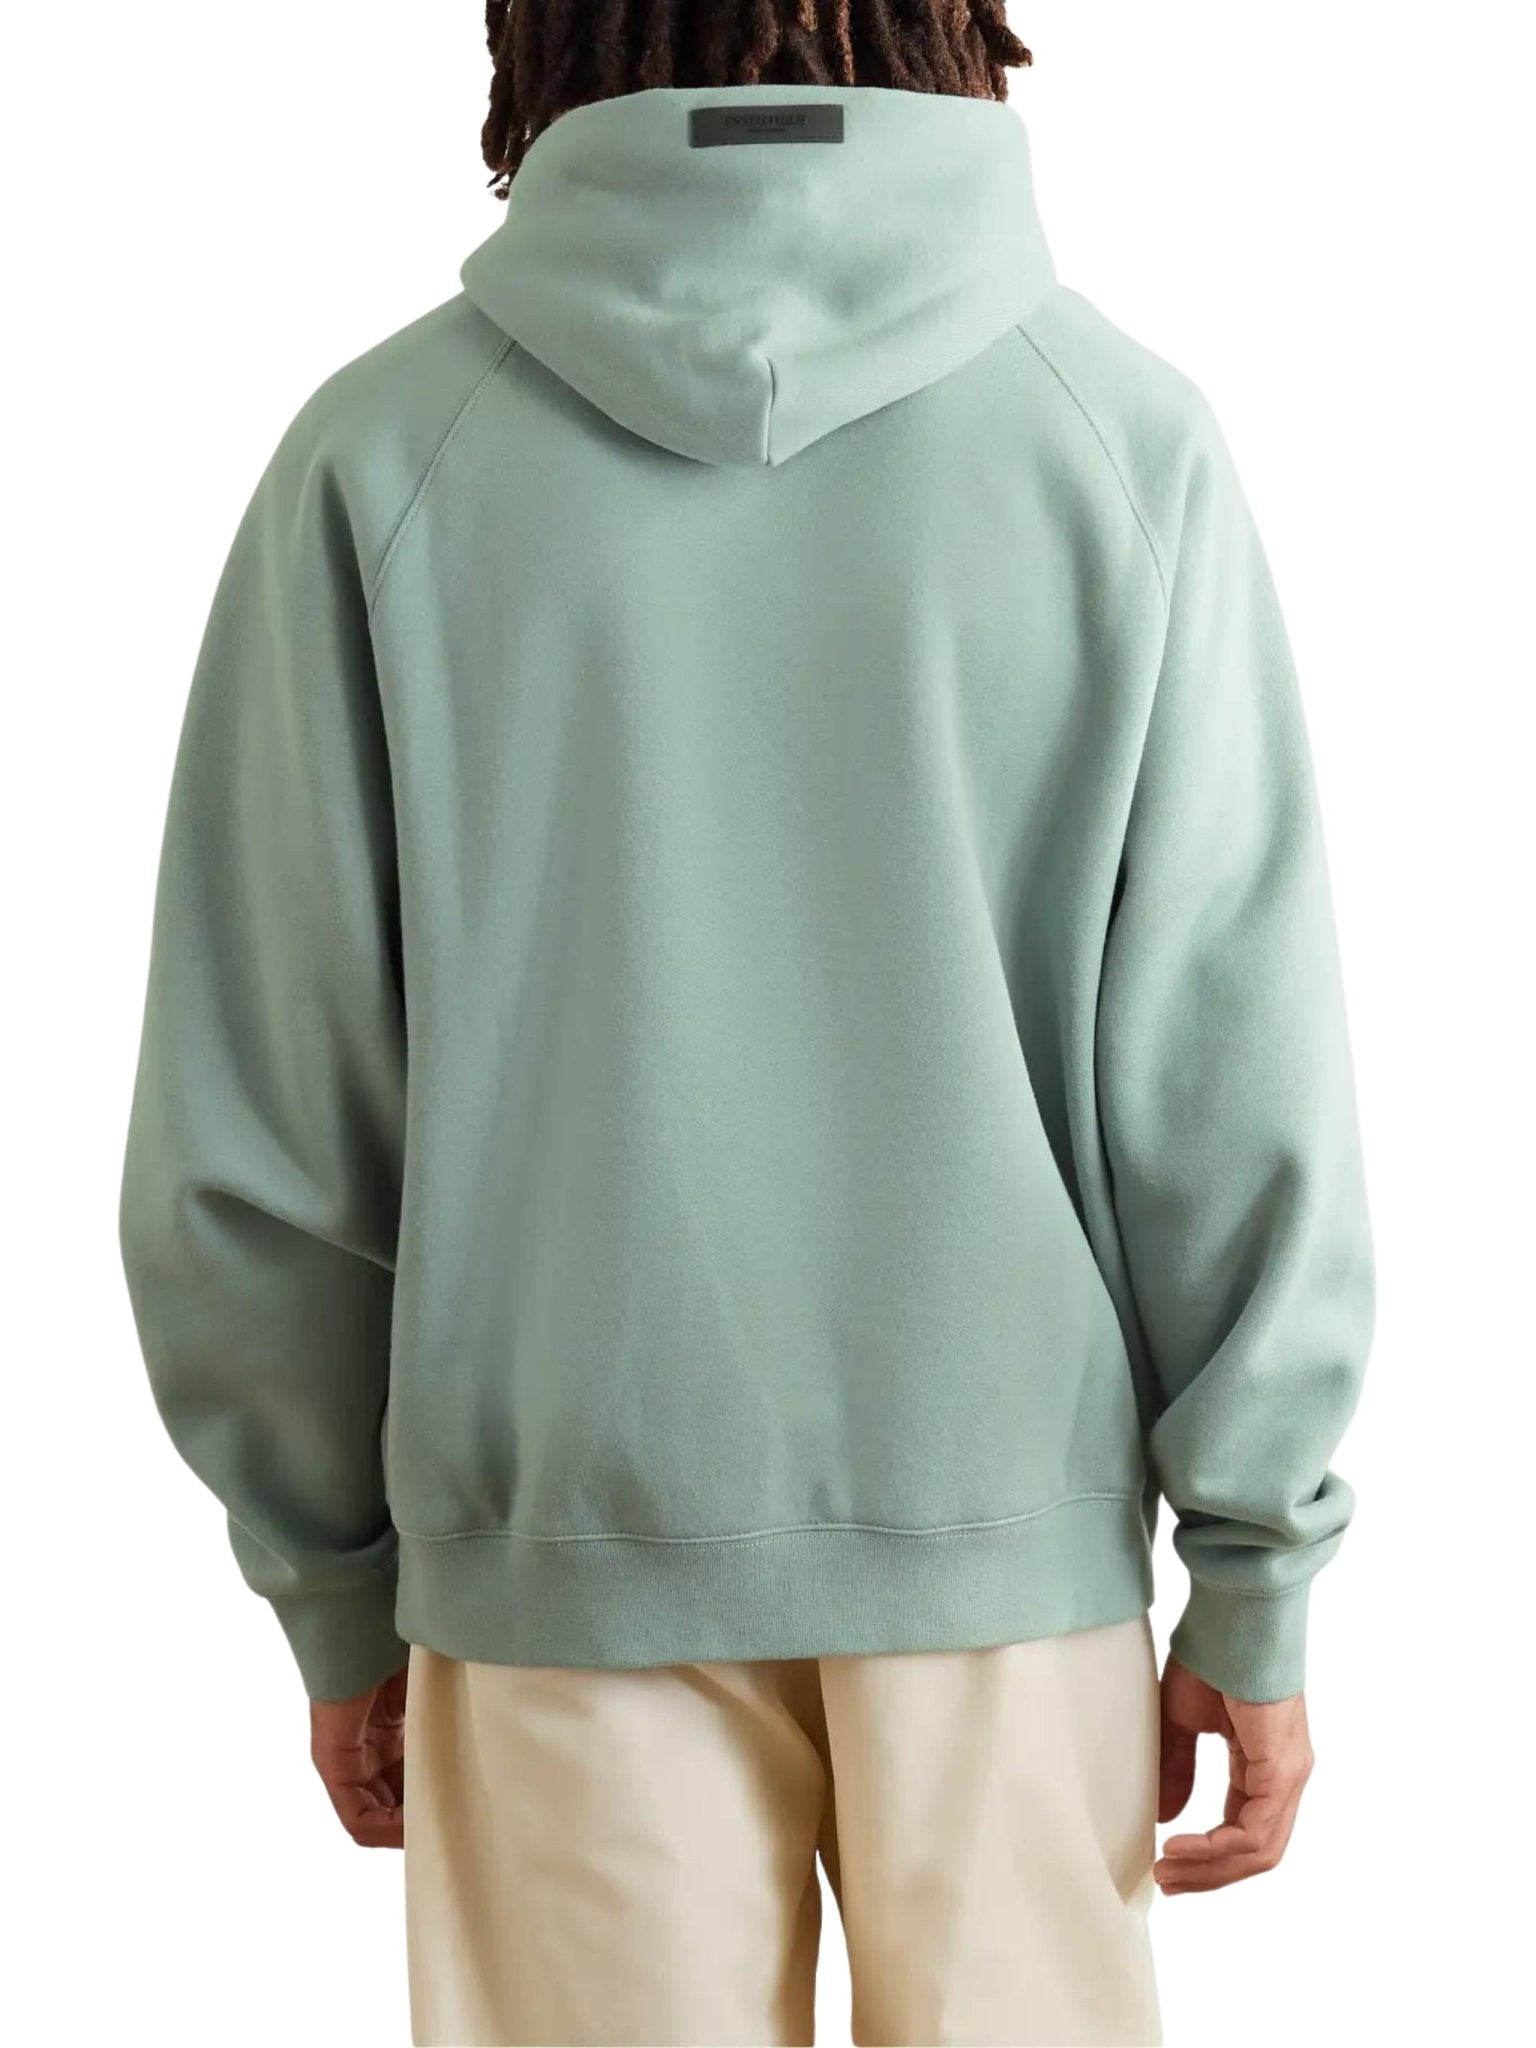 FEAR OF GOD ESSENTIALS SYCAMORE HOODIE (SS23) - Hype Locker UK